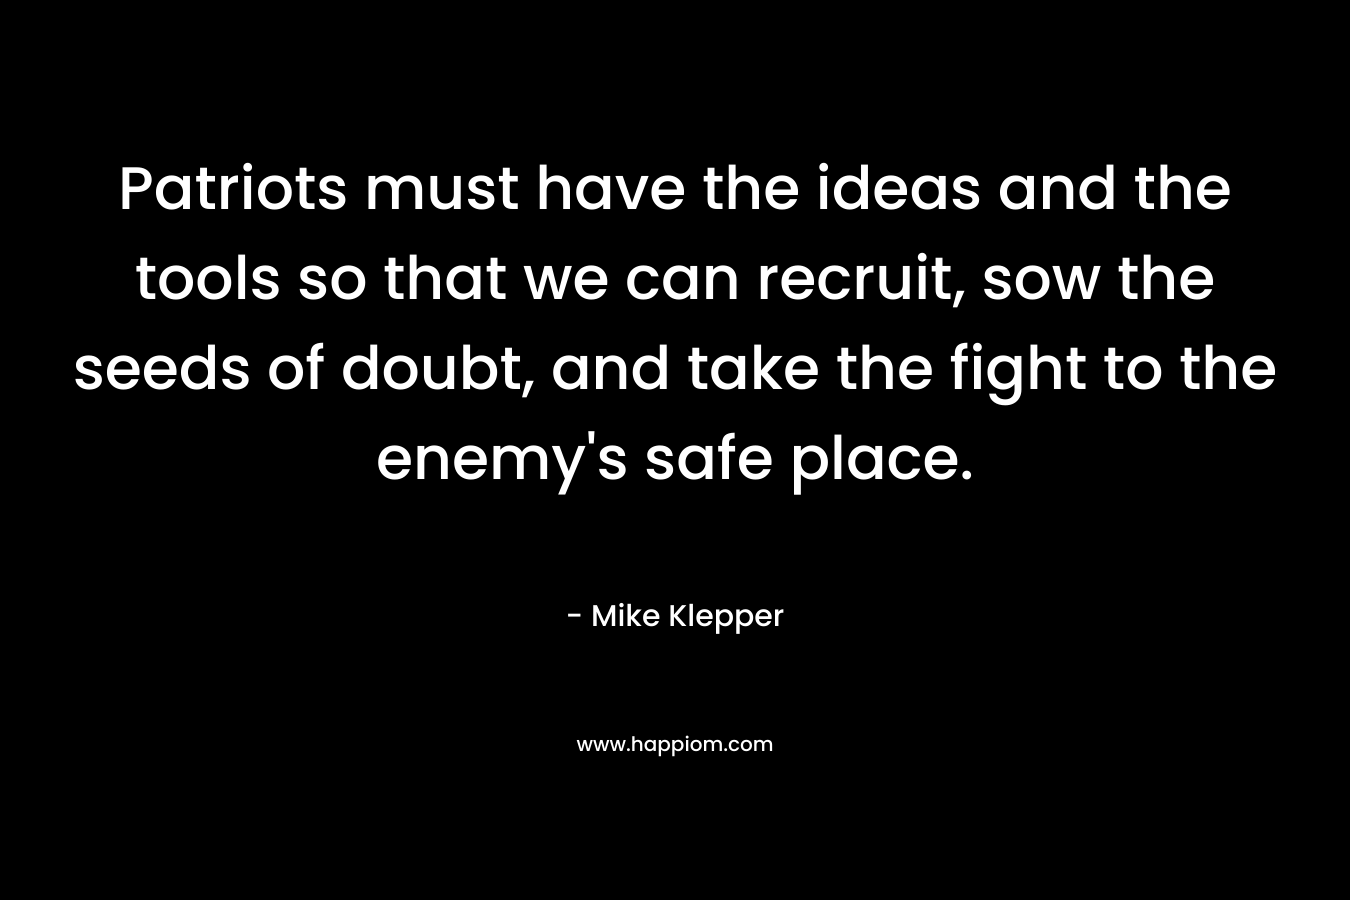 Patriots must have the ideas and the tools so that we can recruit, sow the seeds of doubt, and take the fight to the enemy’s safe place. – Mike Klepper